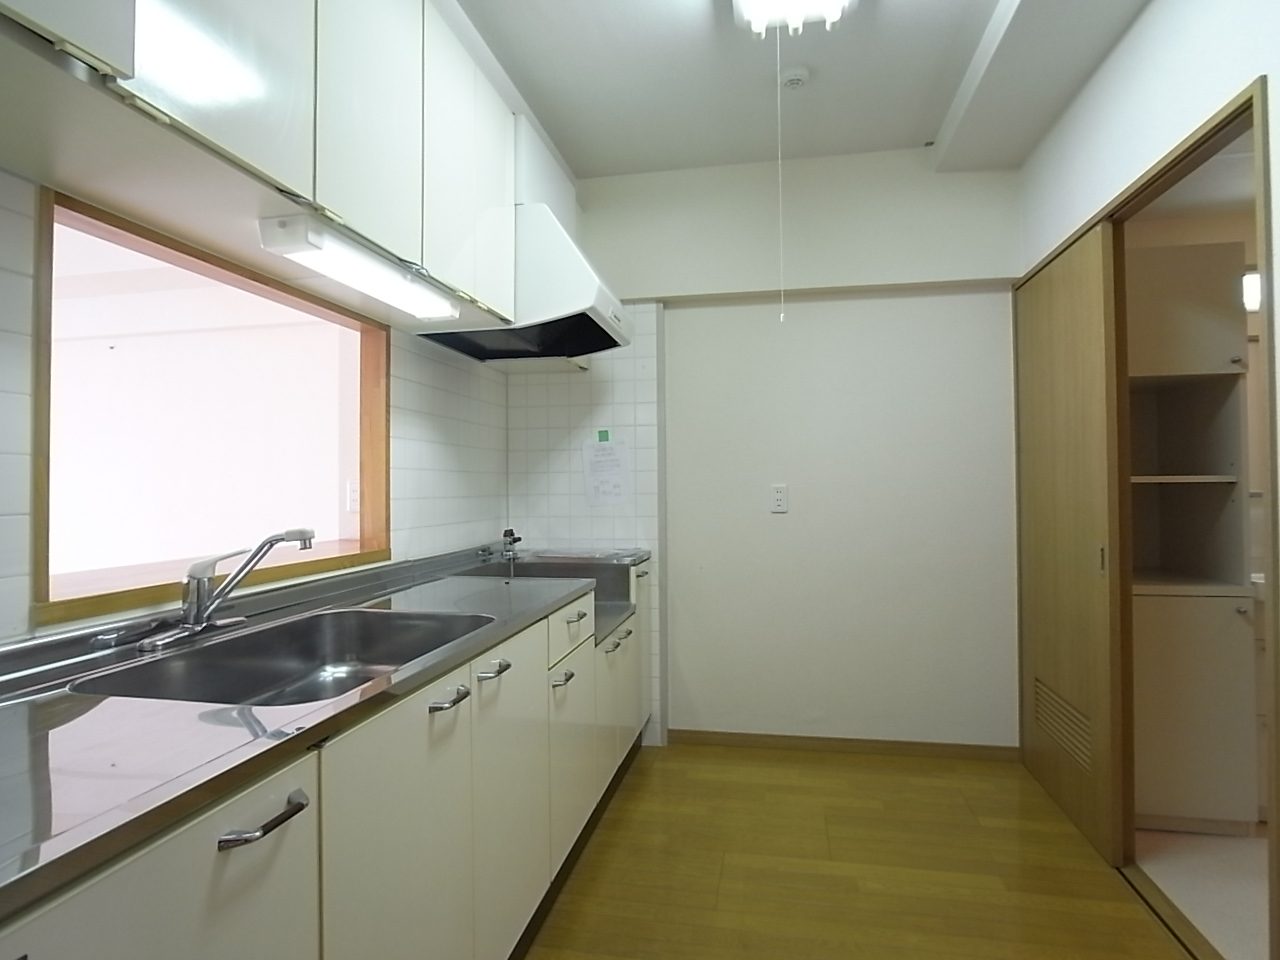 Kitchen. Easy-to-use wide kitchen 2WAY from the lavatory